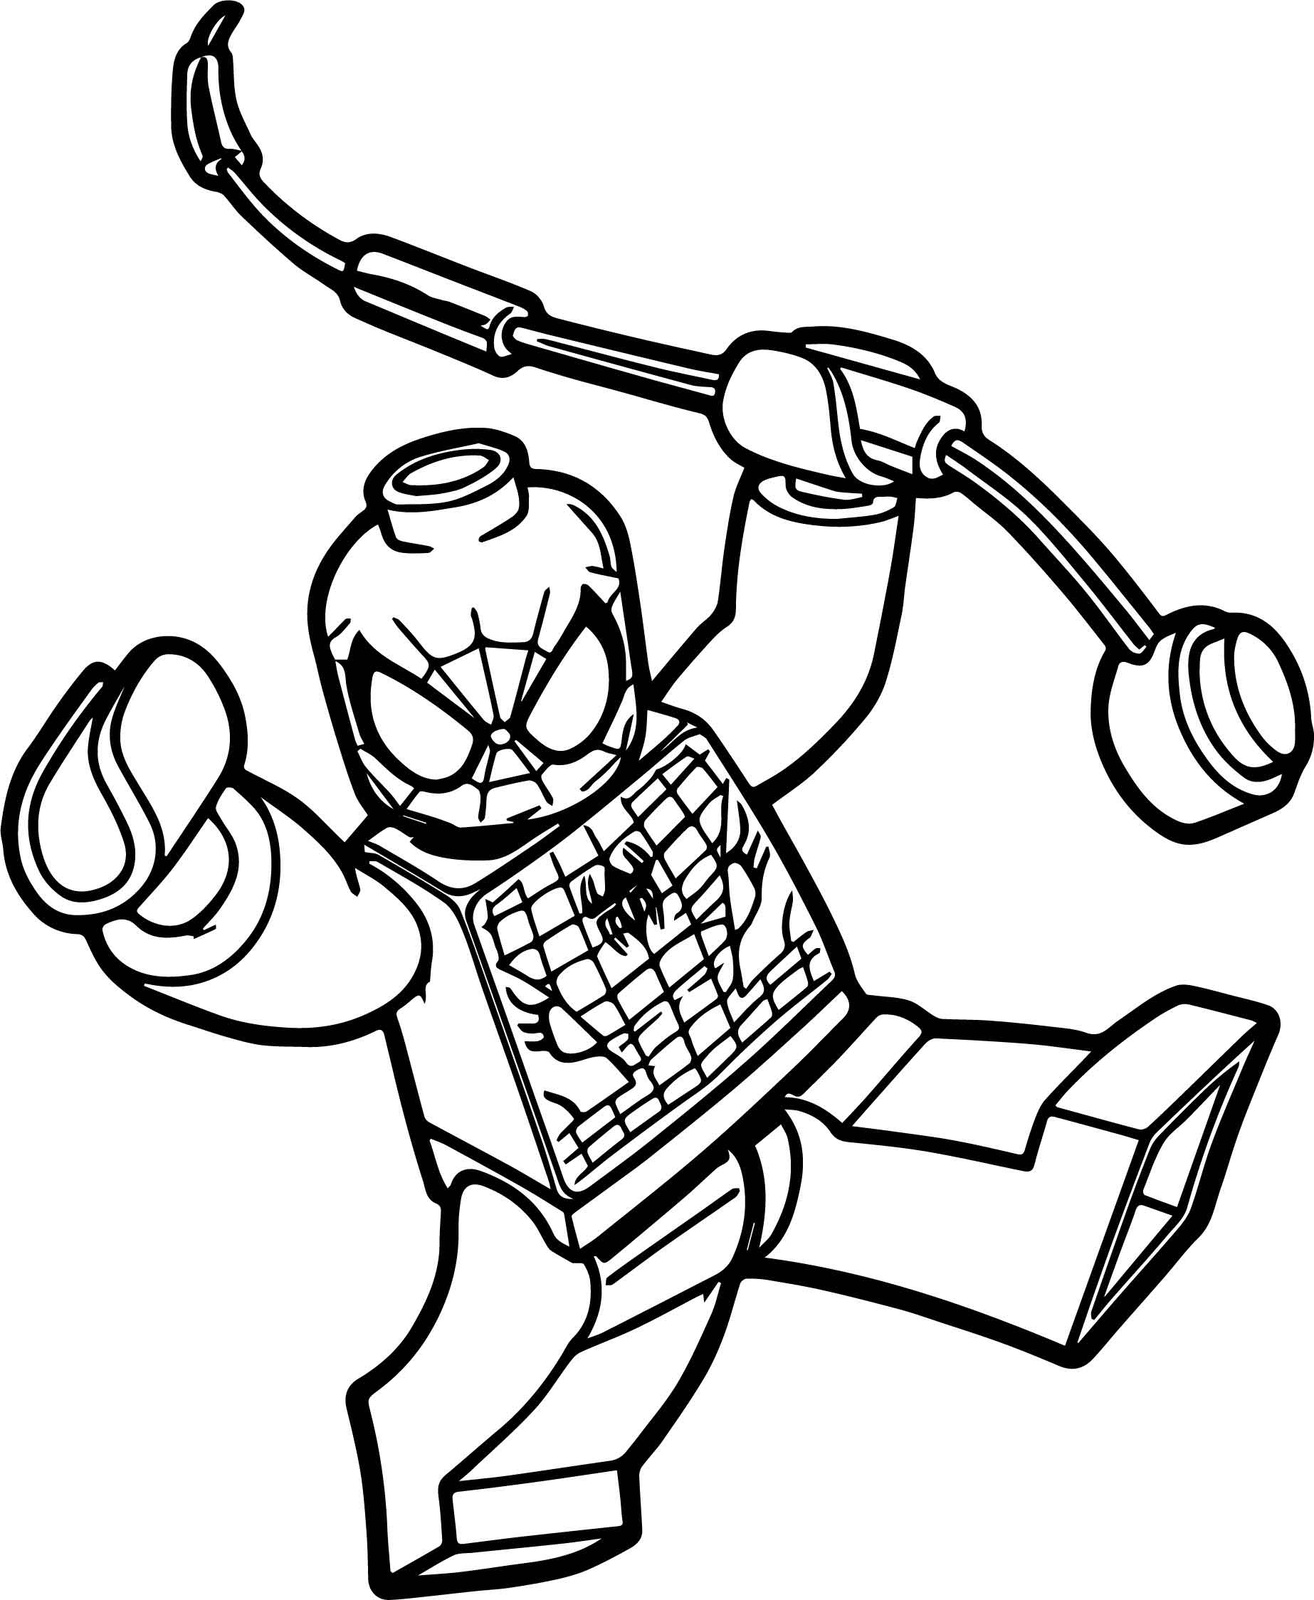 Lego Spiderman Coloring pages ? to print and color